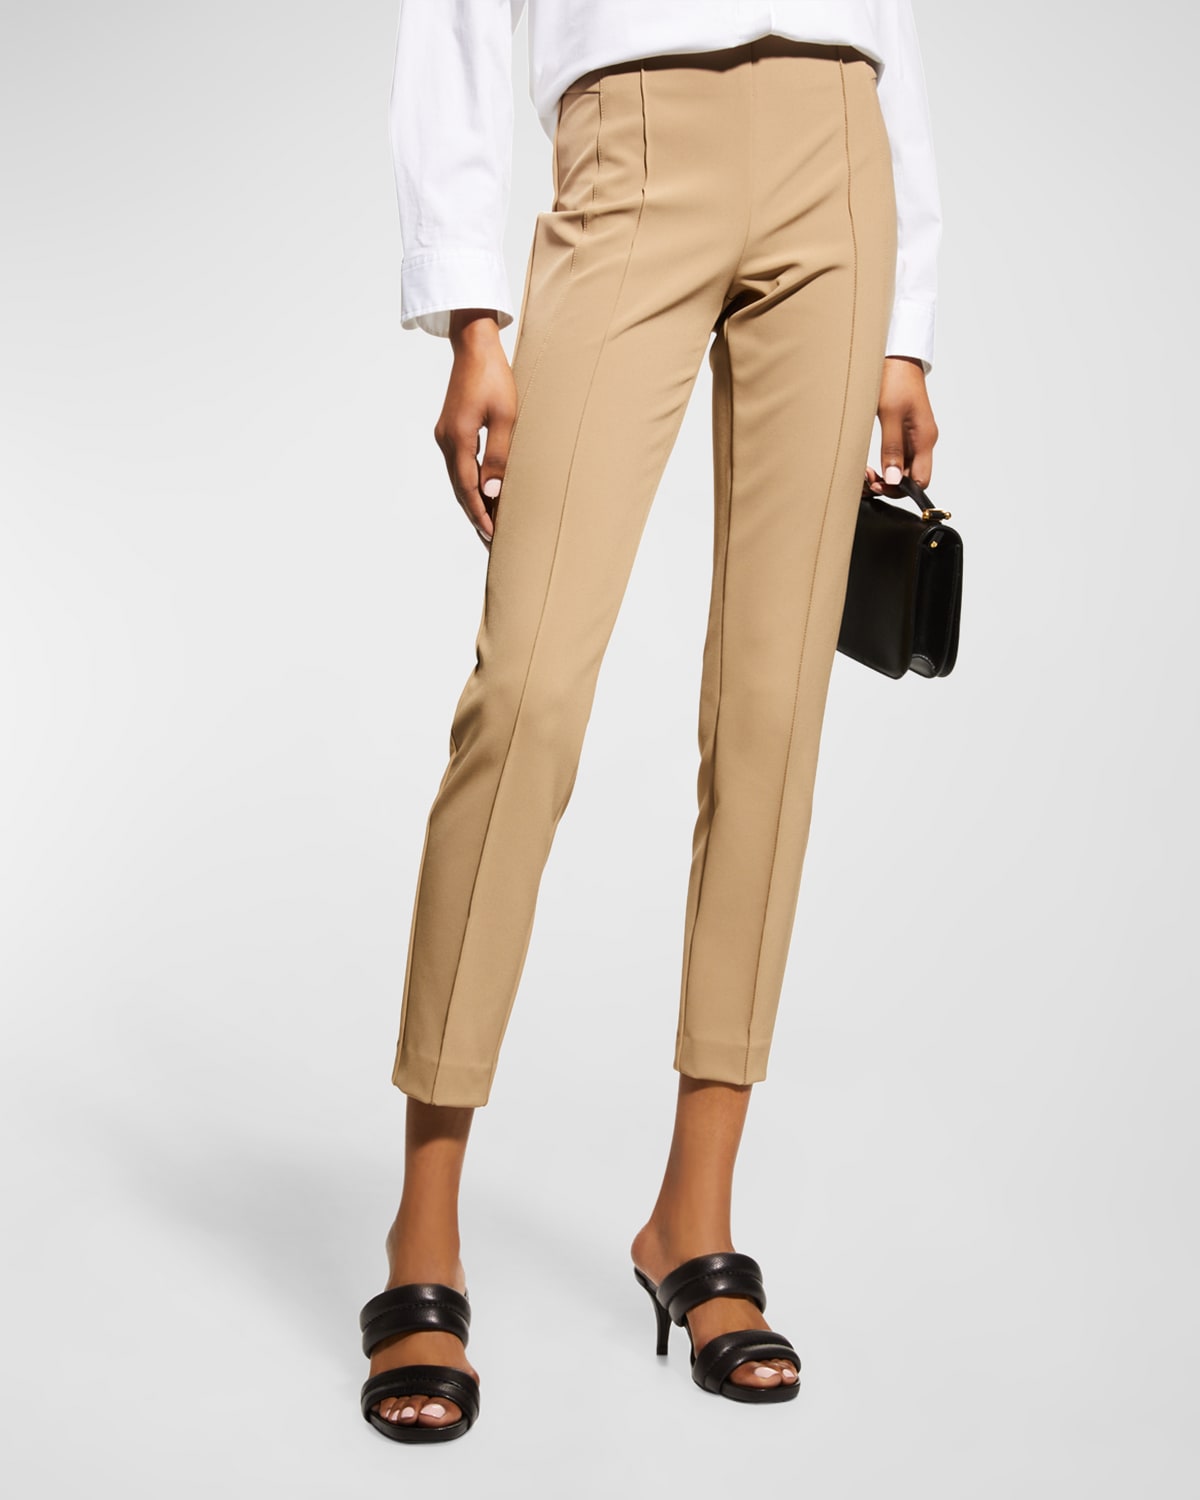 Lafayette 148 Petite Gramercy Acclaimed Stretch Pants In Cammello